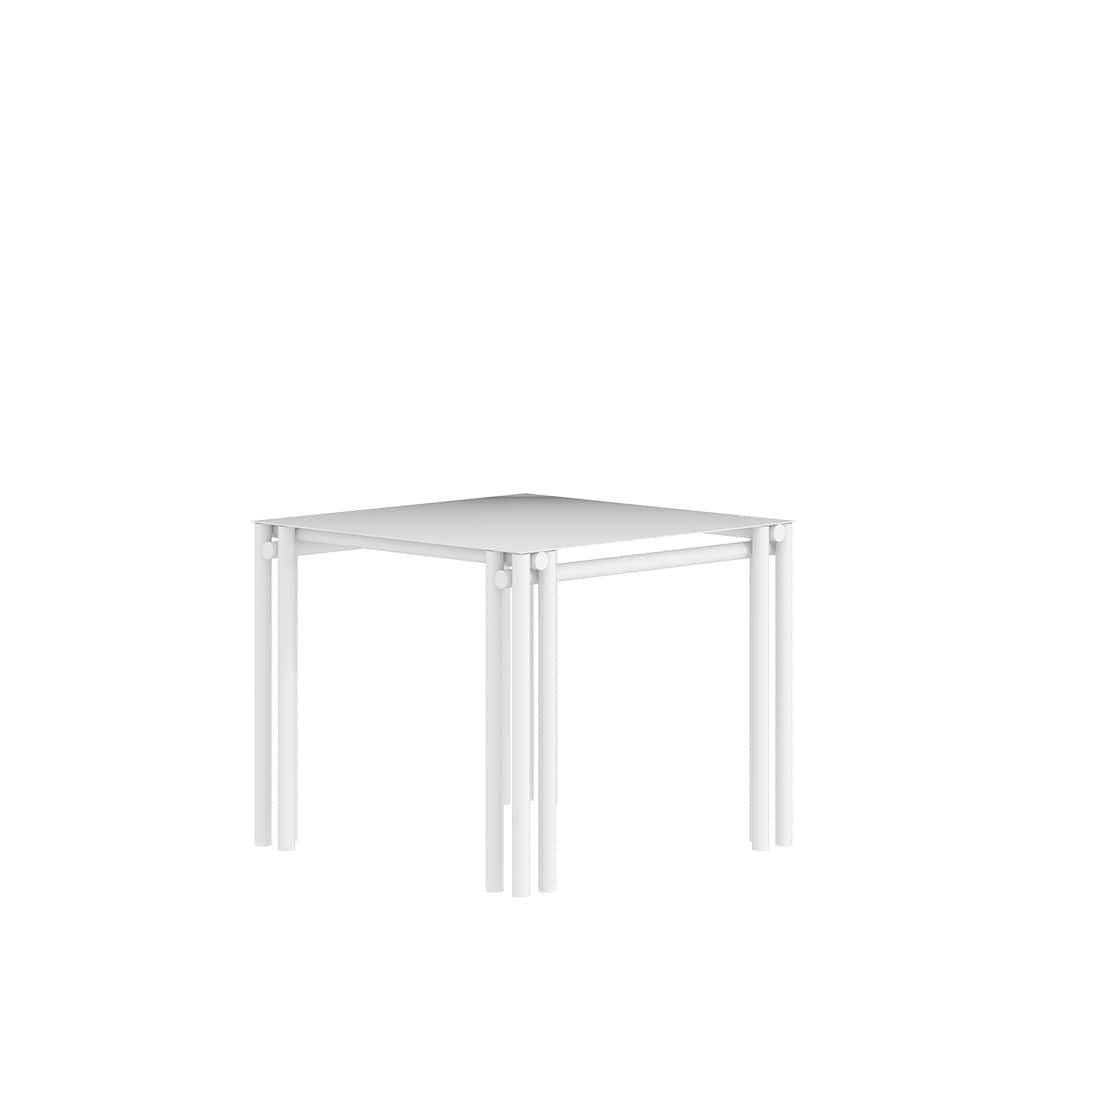 Mexican Dolmen Square Dining Table For Sale